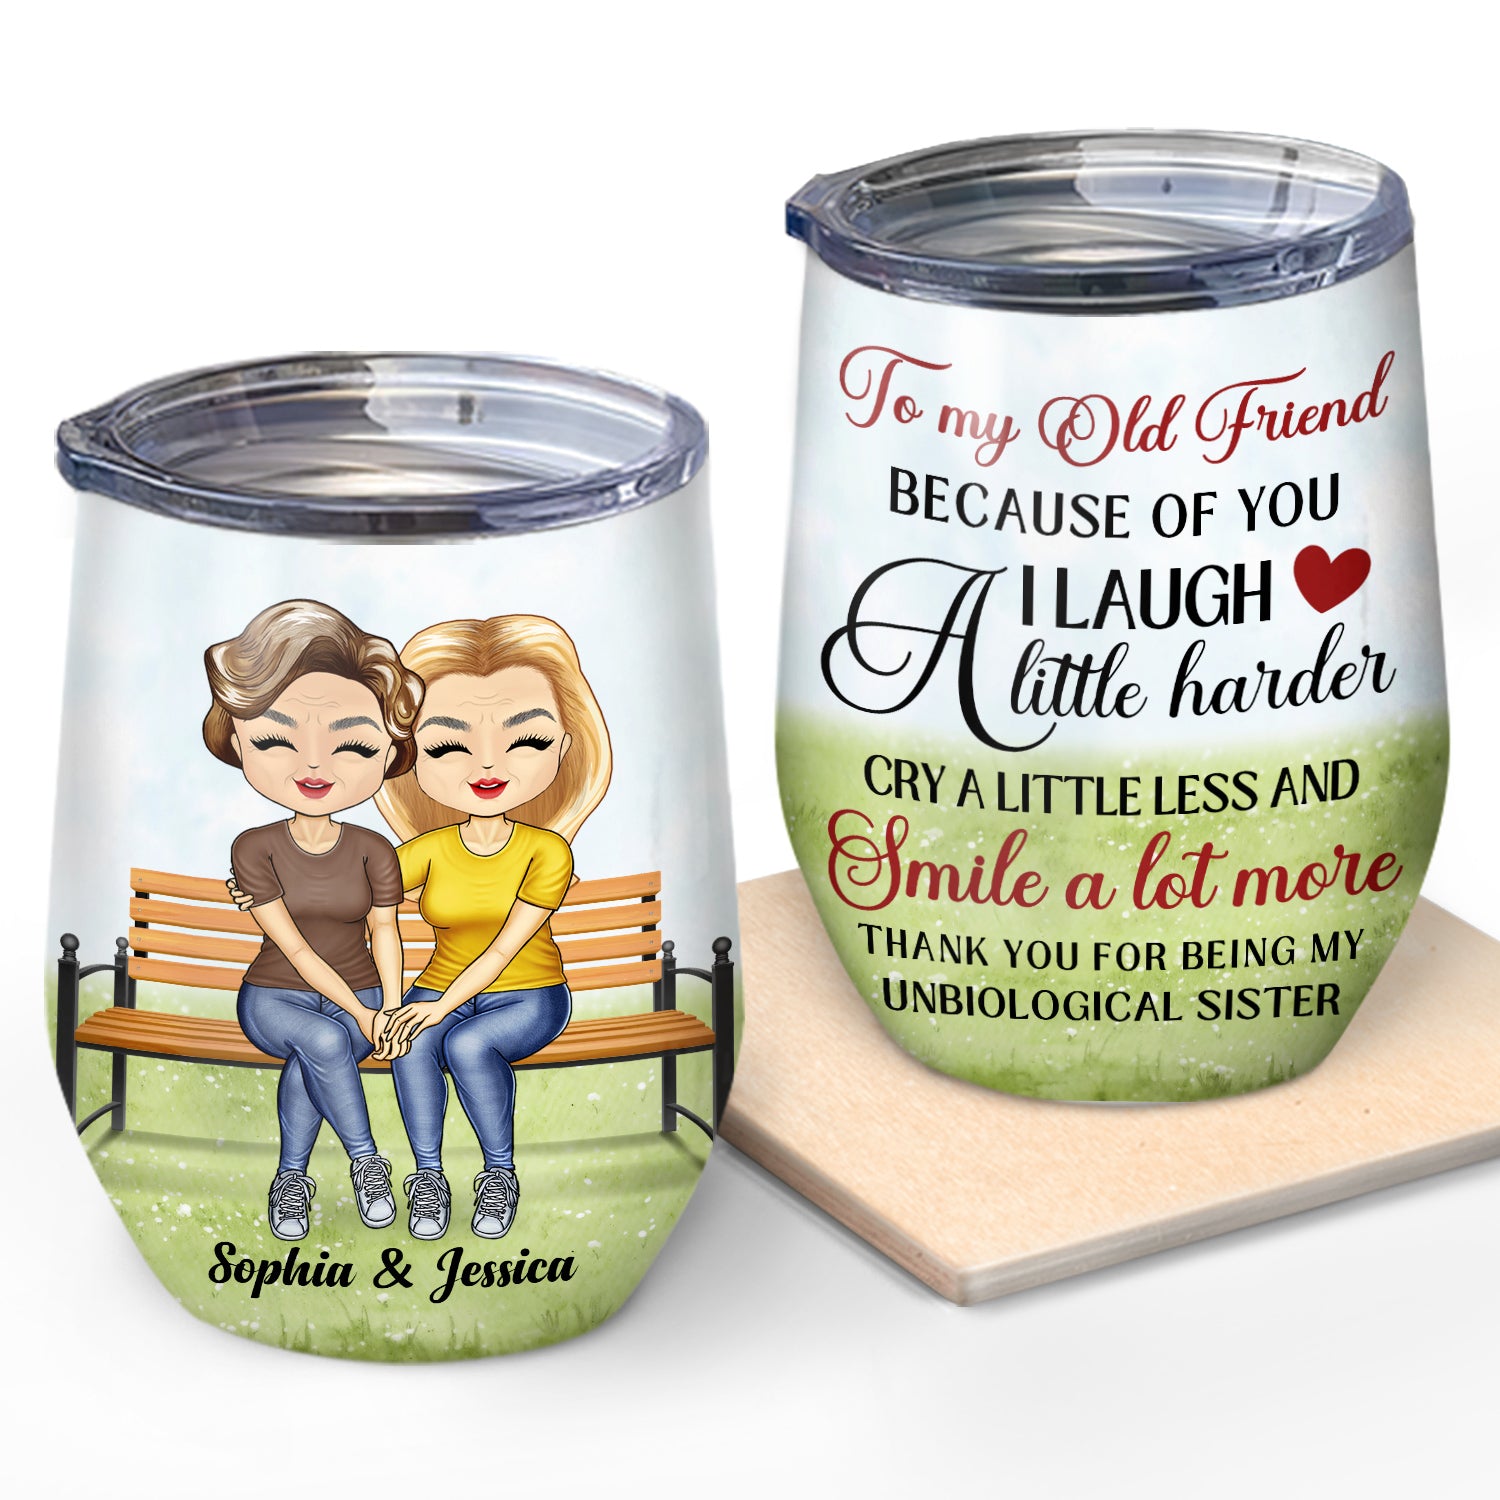 To My Old Friend Because Of You I Laugh A Little Harder - Birthday, Anniversary, Loving Gift For Woman, Bestie, Sister - Personalized Wine Tumbler